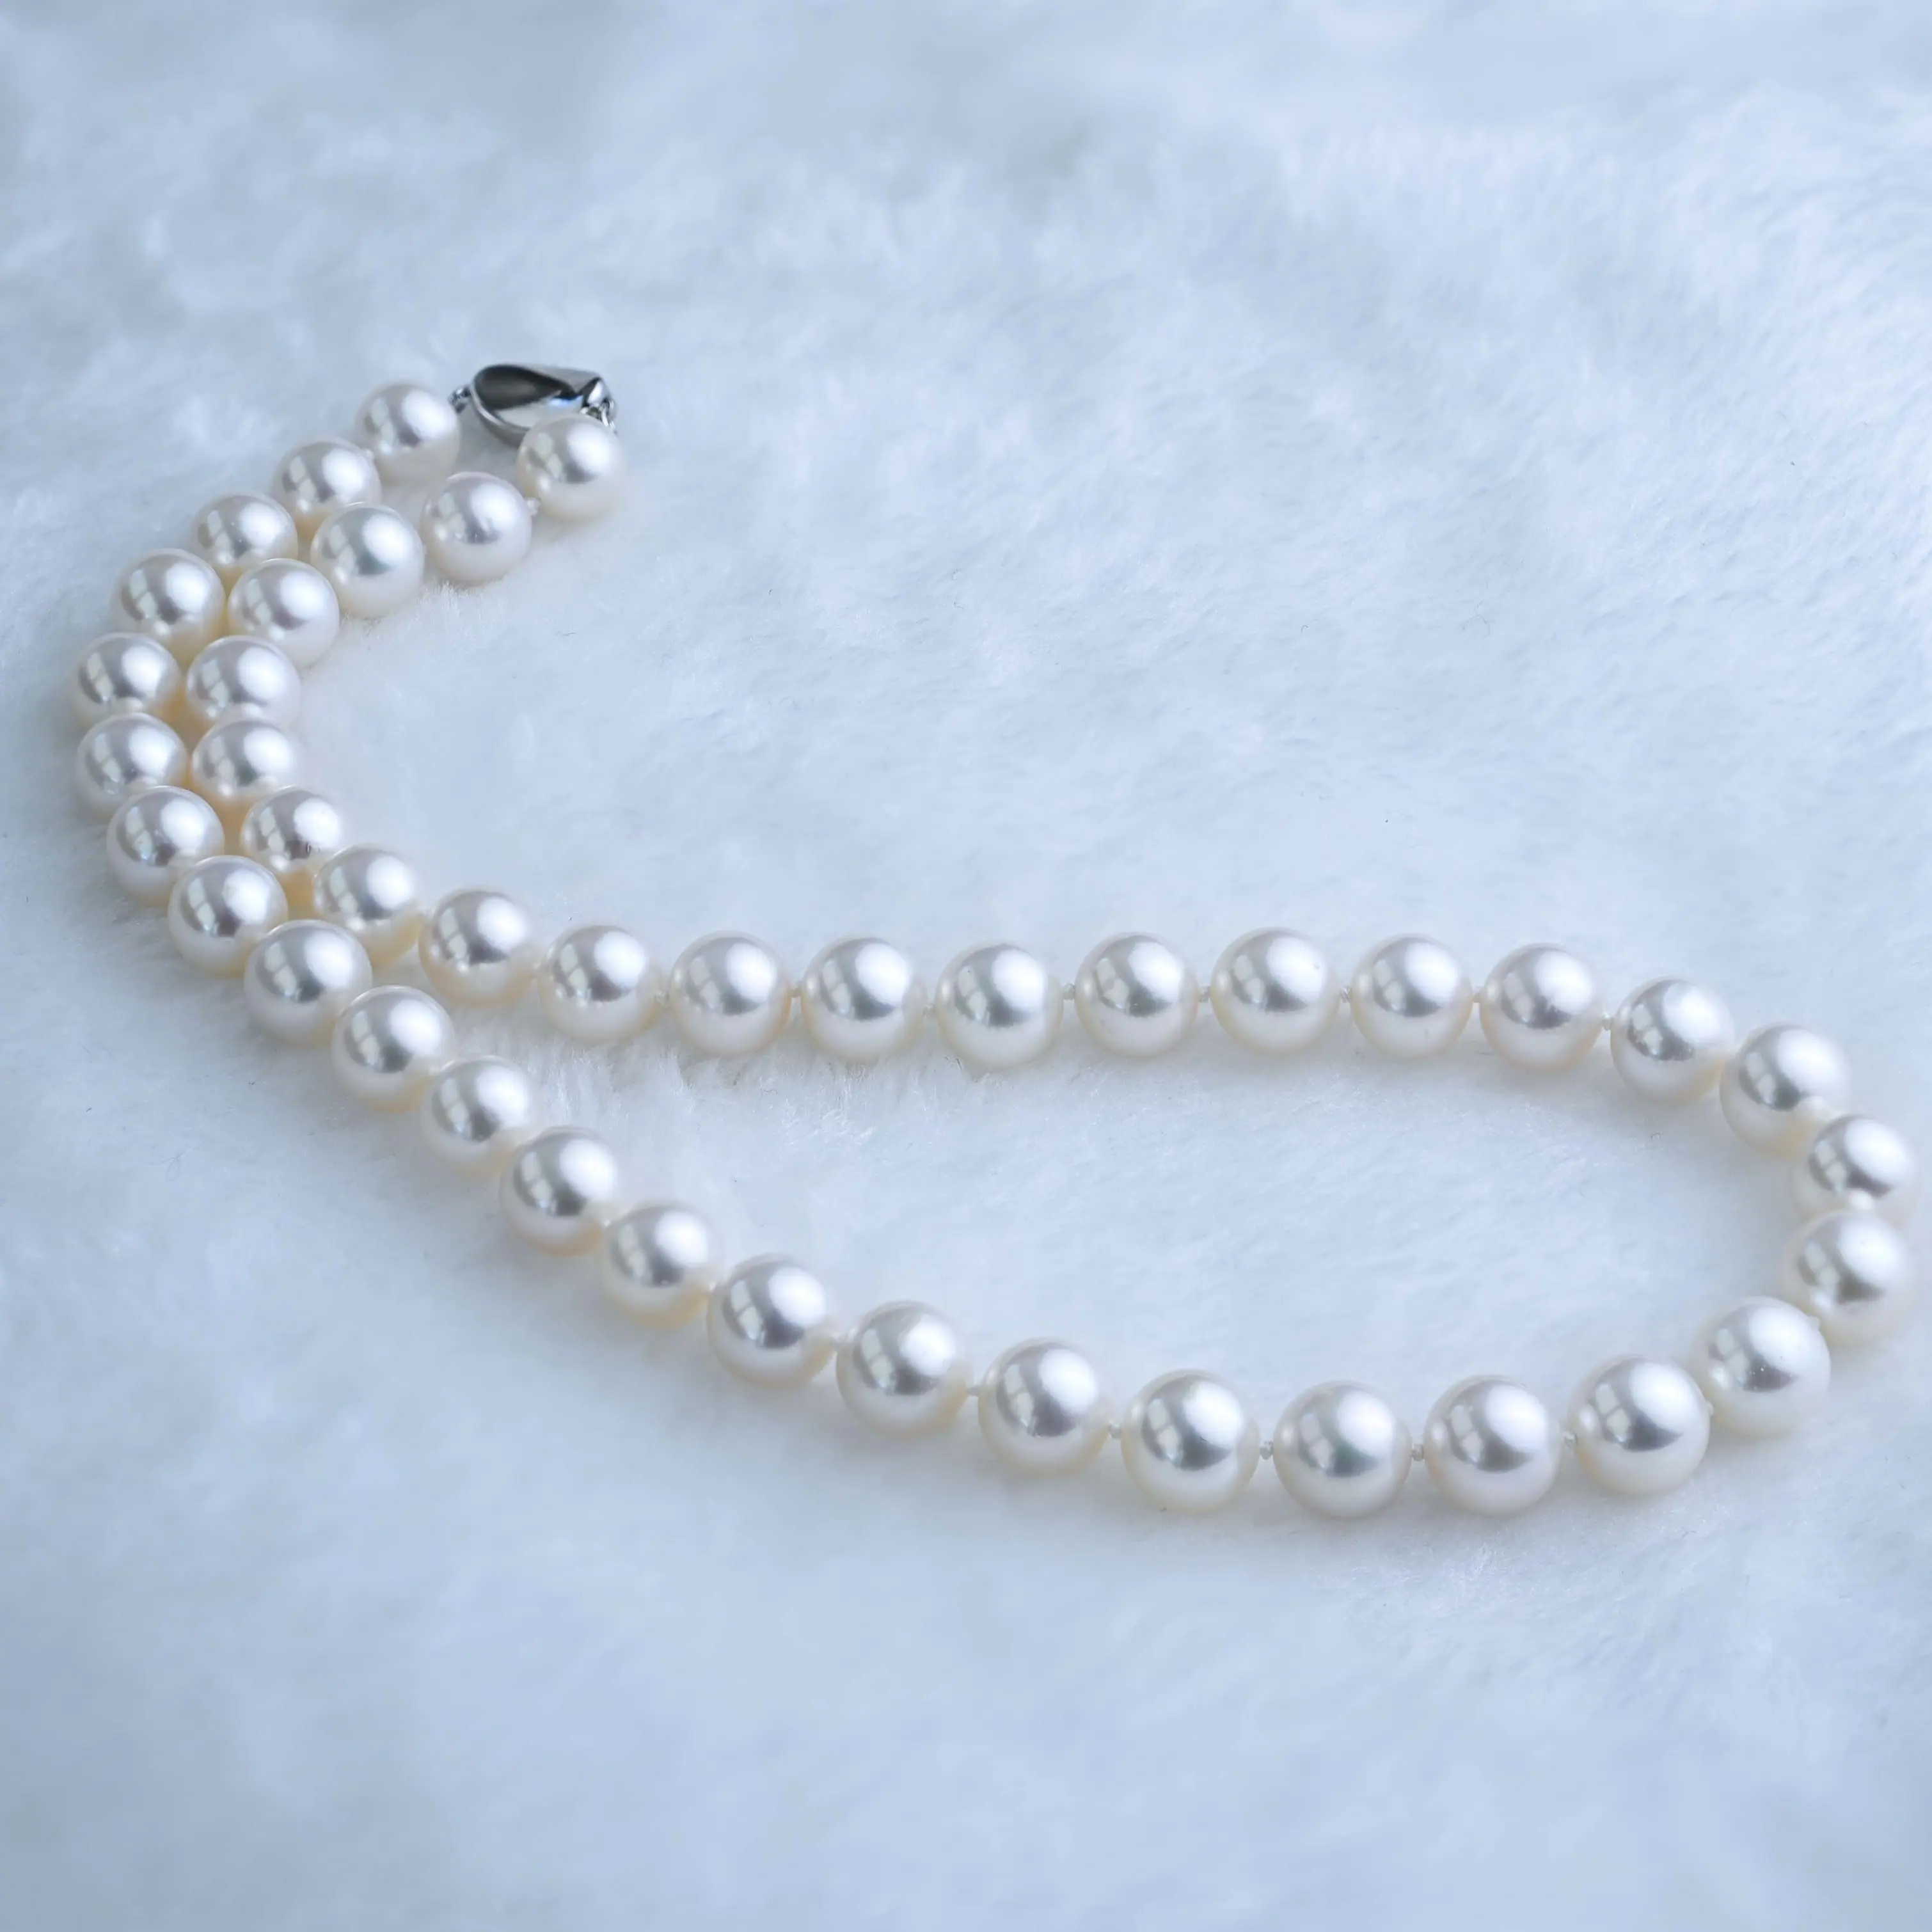 Aurora Series 10-11m Nucleated Pearls Full Bead Chain Large Ingot Clasp Necklace